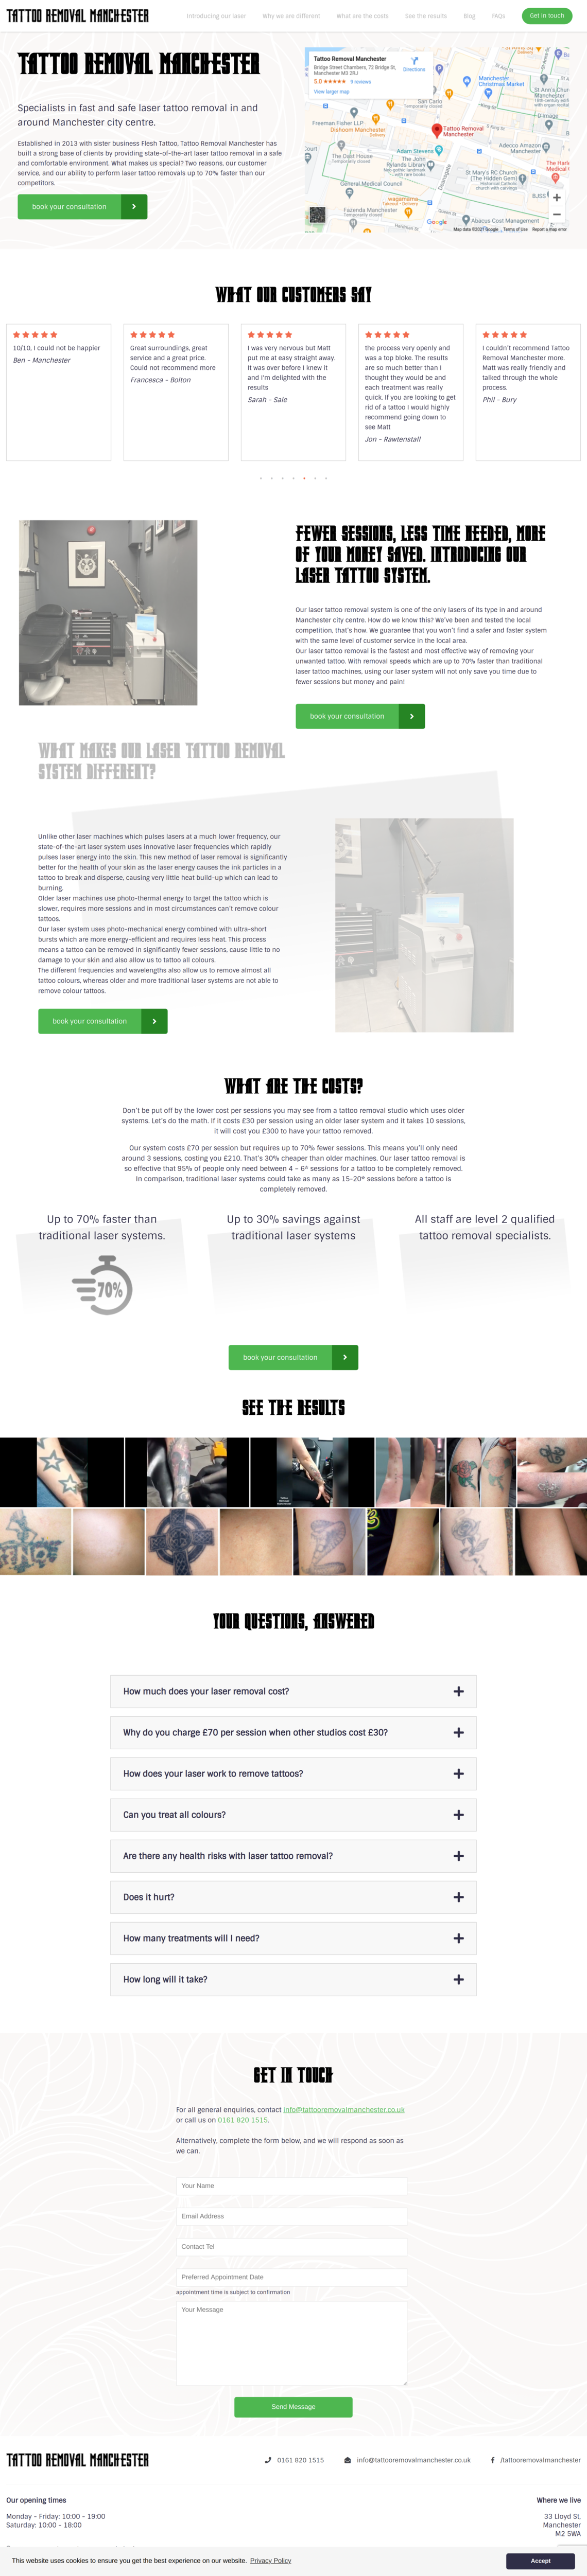 Landing Page Template for Tattoo Removal - tattooremovalmanchester.co.uk